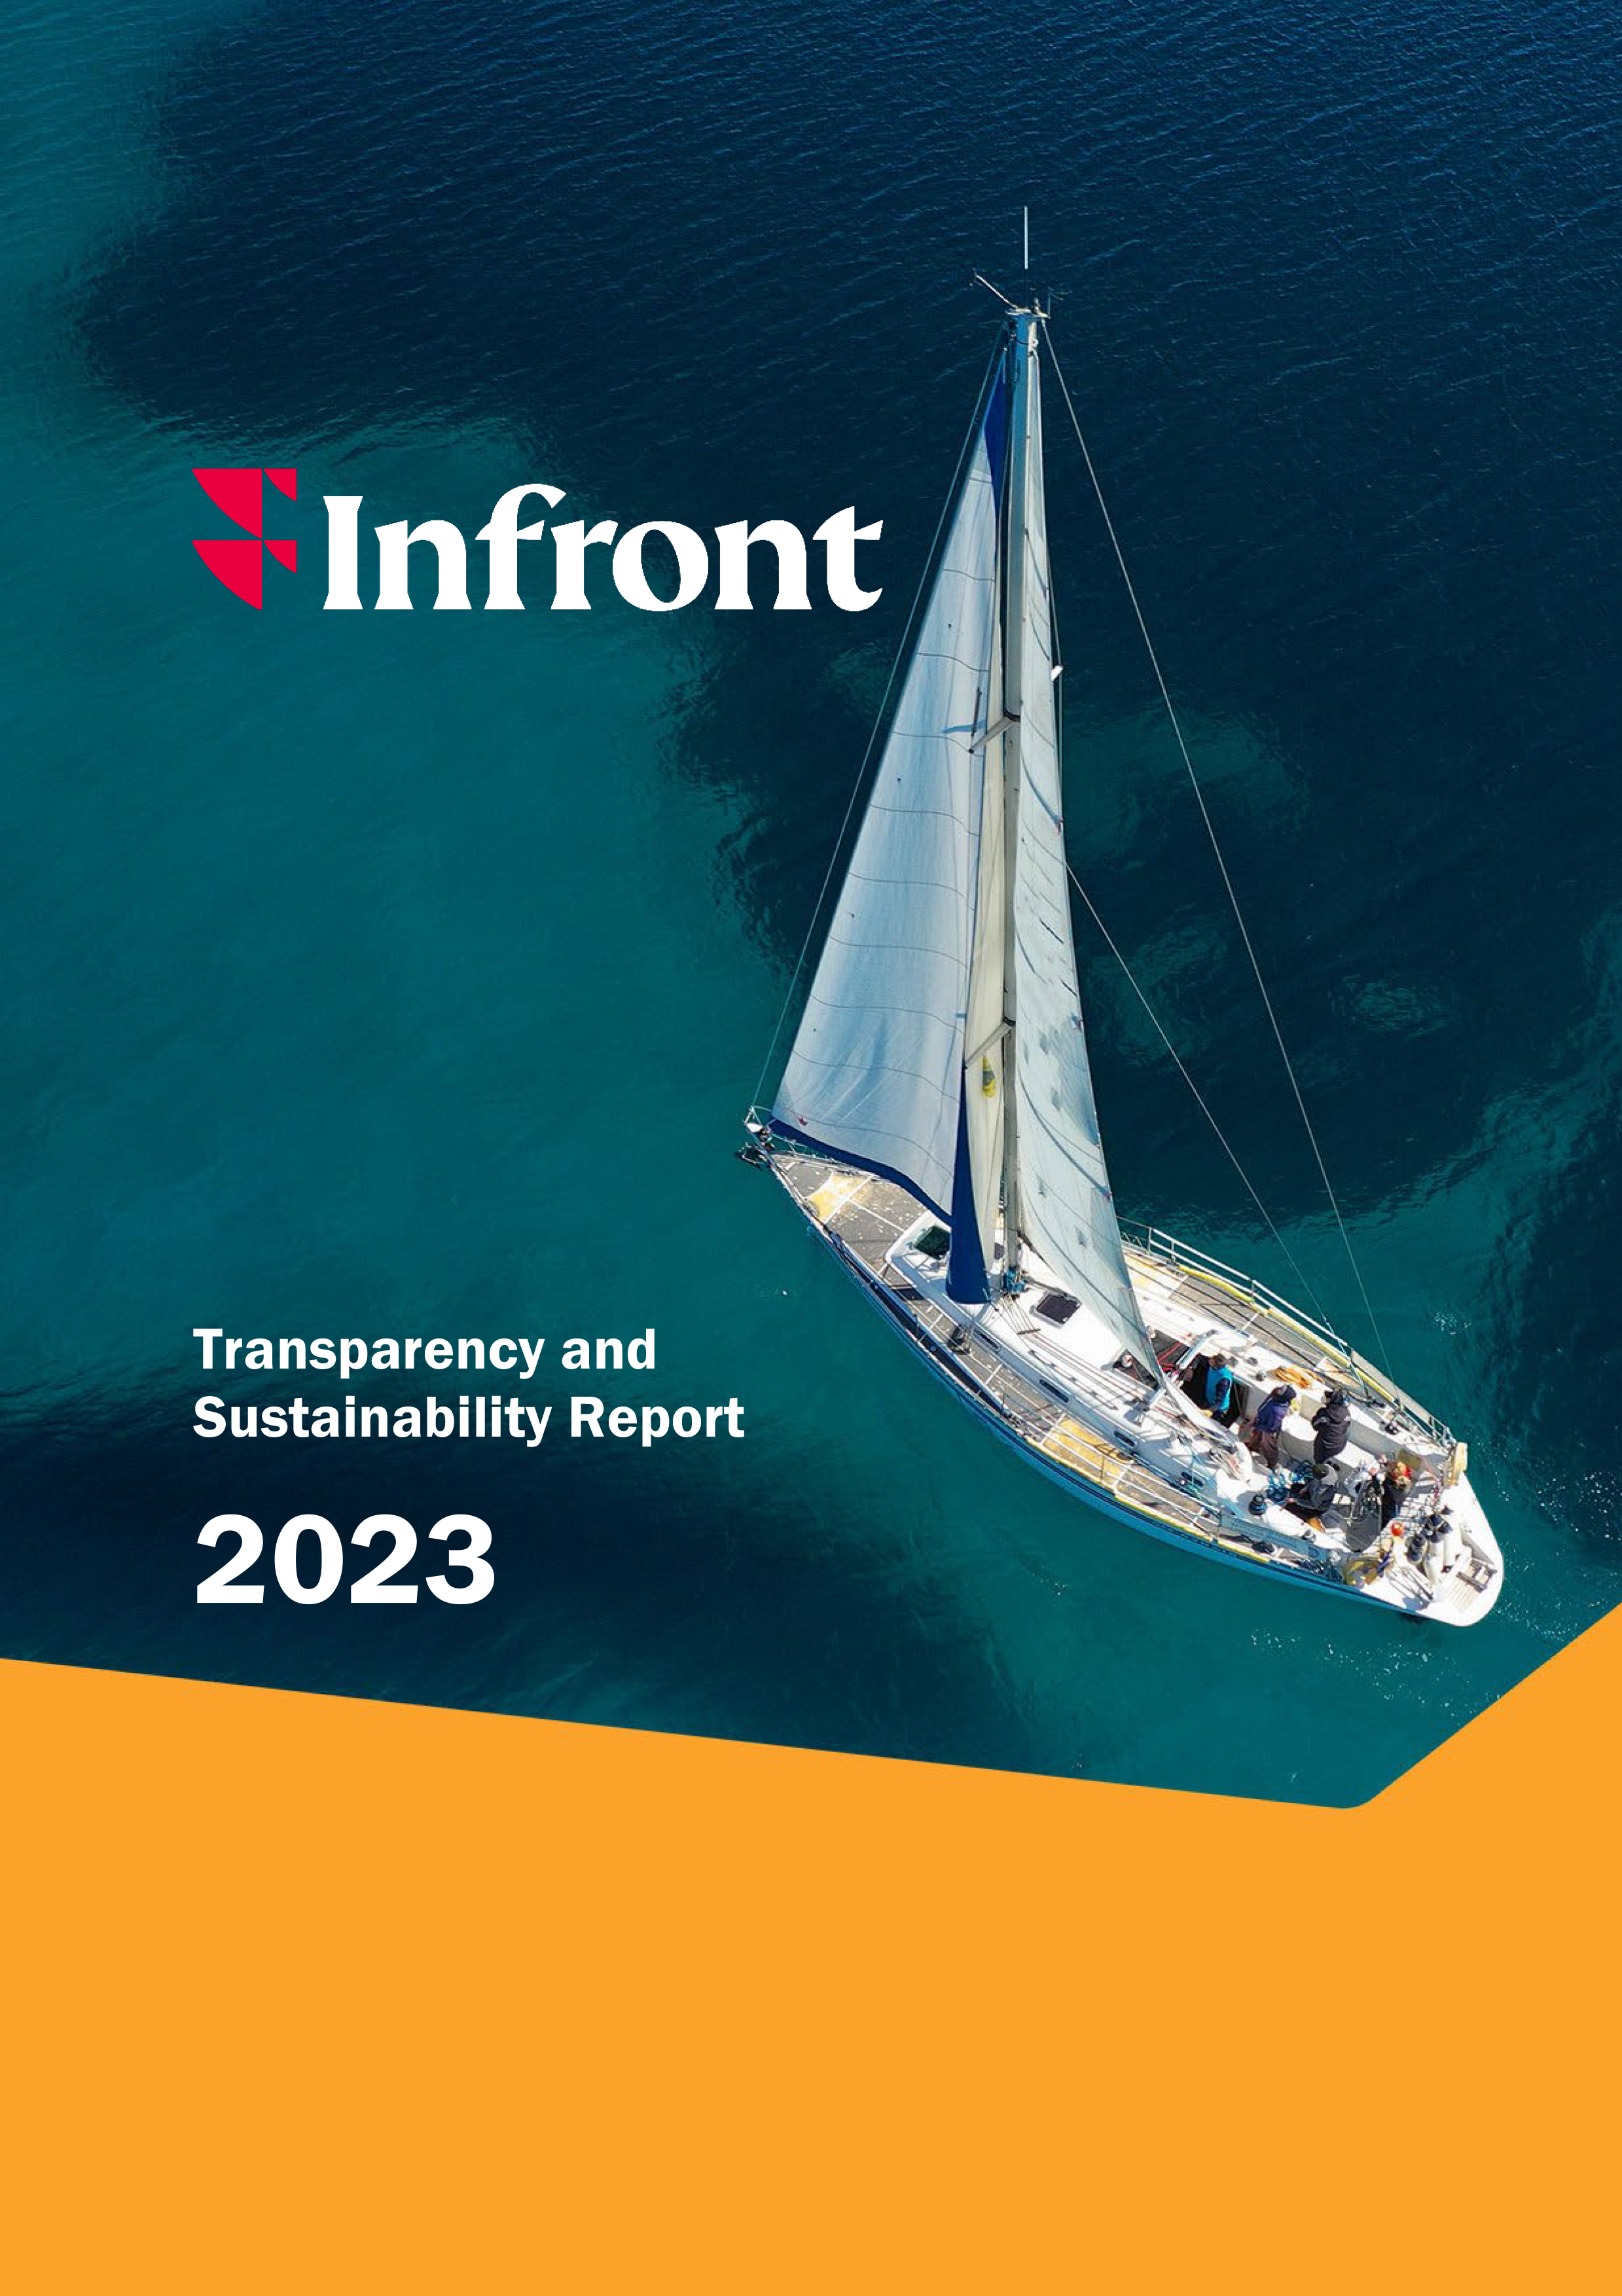 Infront transparency report 2023